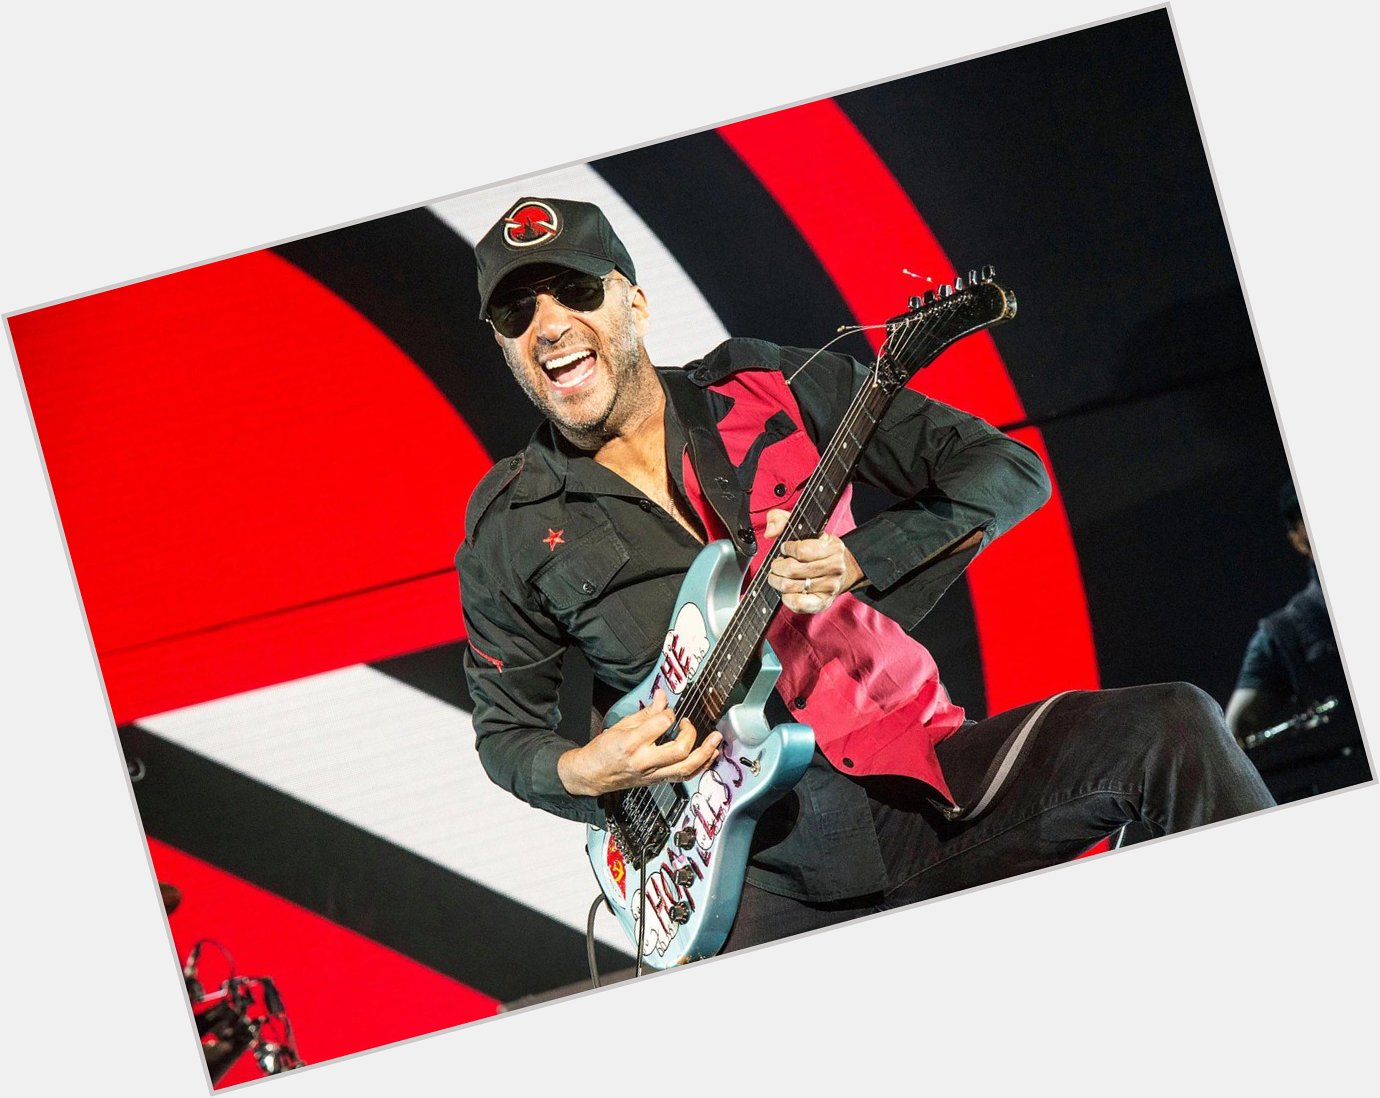 Happy belated birthday to Tom Morello! Double nickles as of yesterday. 